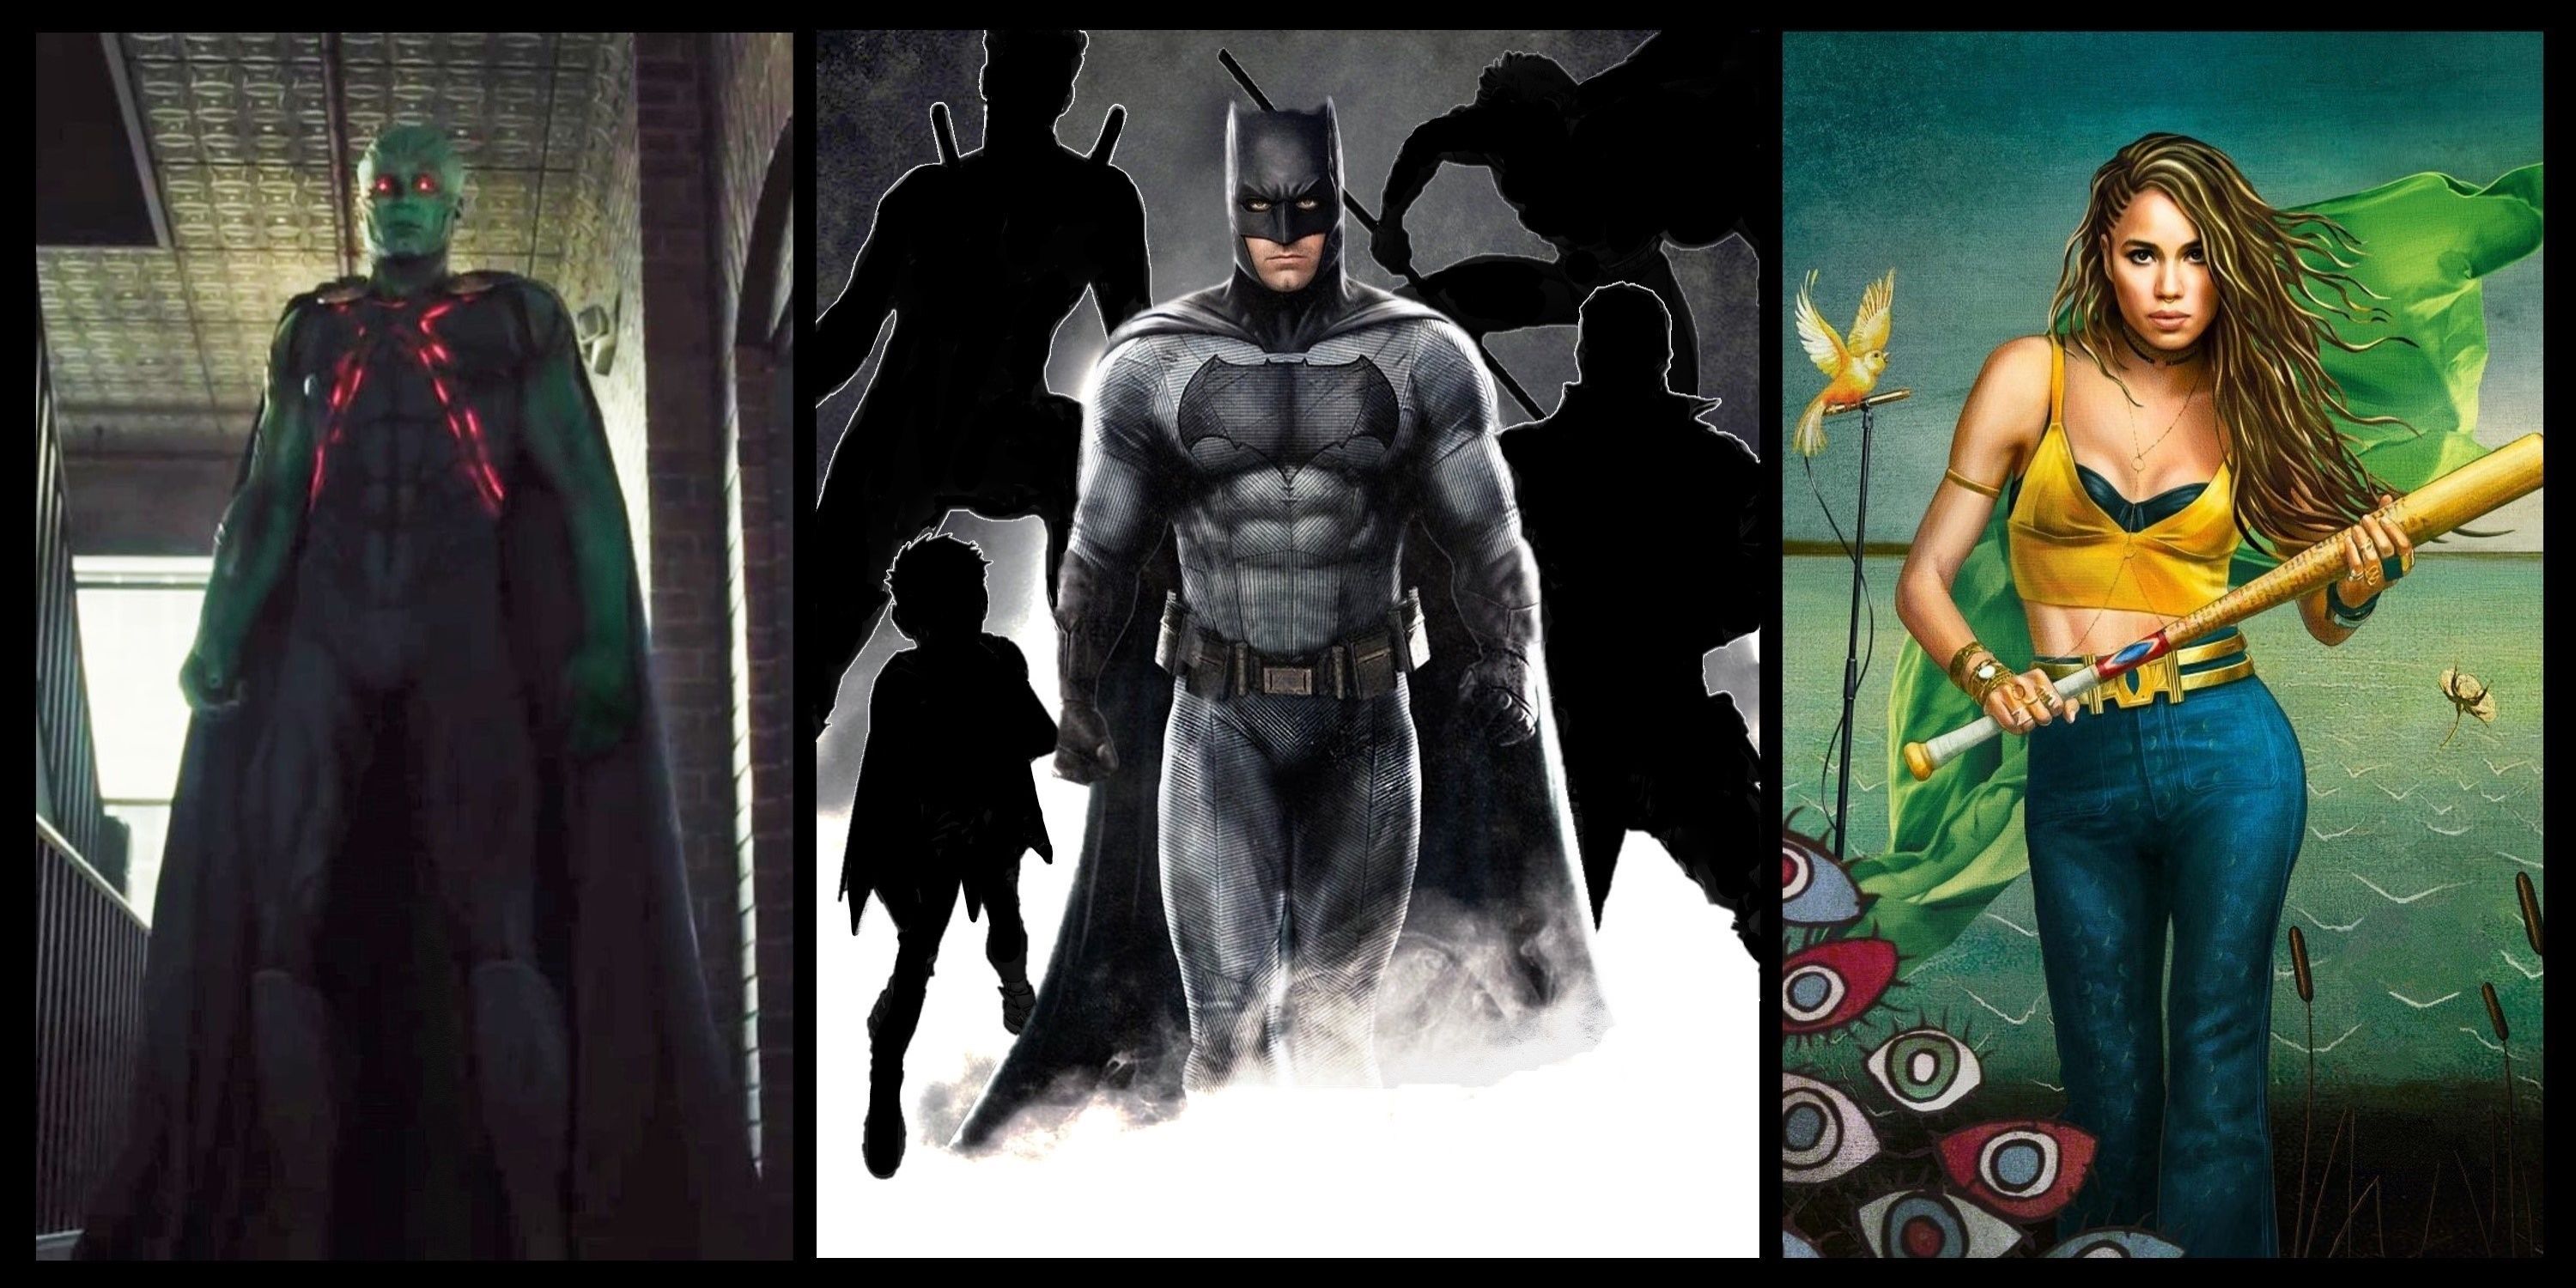 Split image of Martian Manhunter, Ben Affleck's Batman surrounded by silhouettes of his sons, and Jurnee Smollett's Black Canary